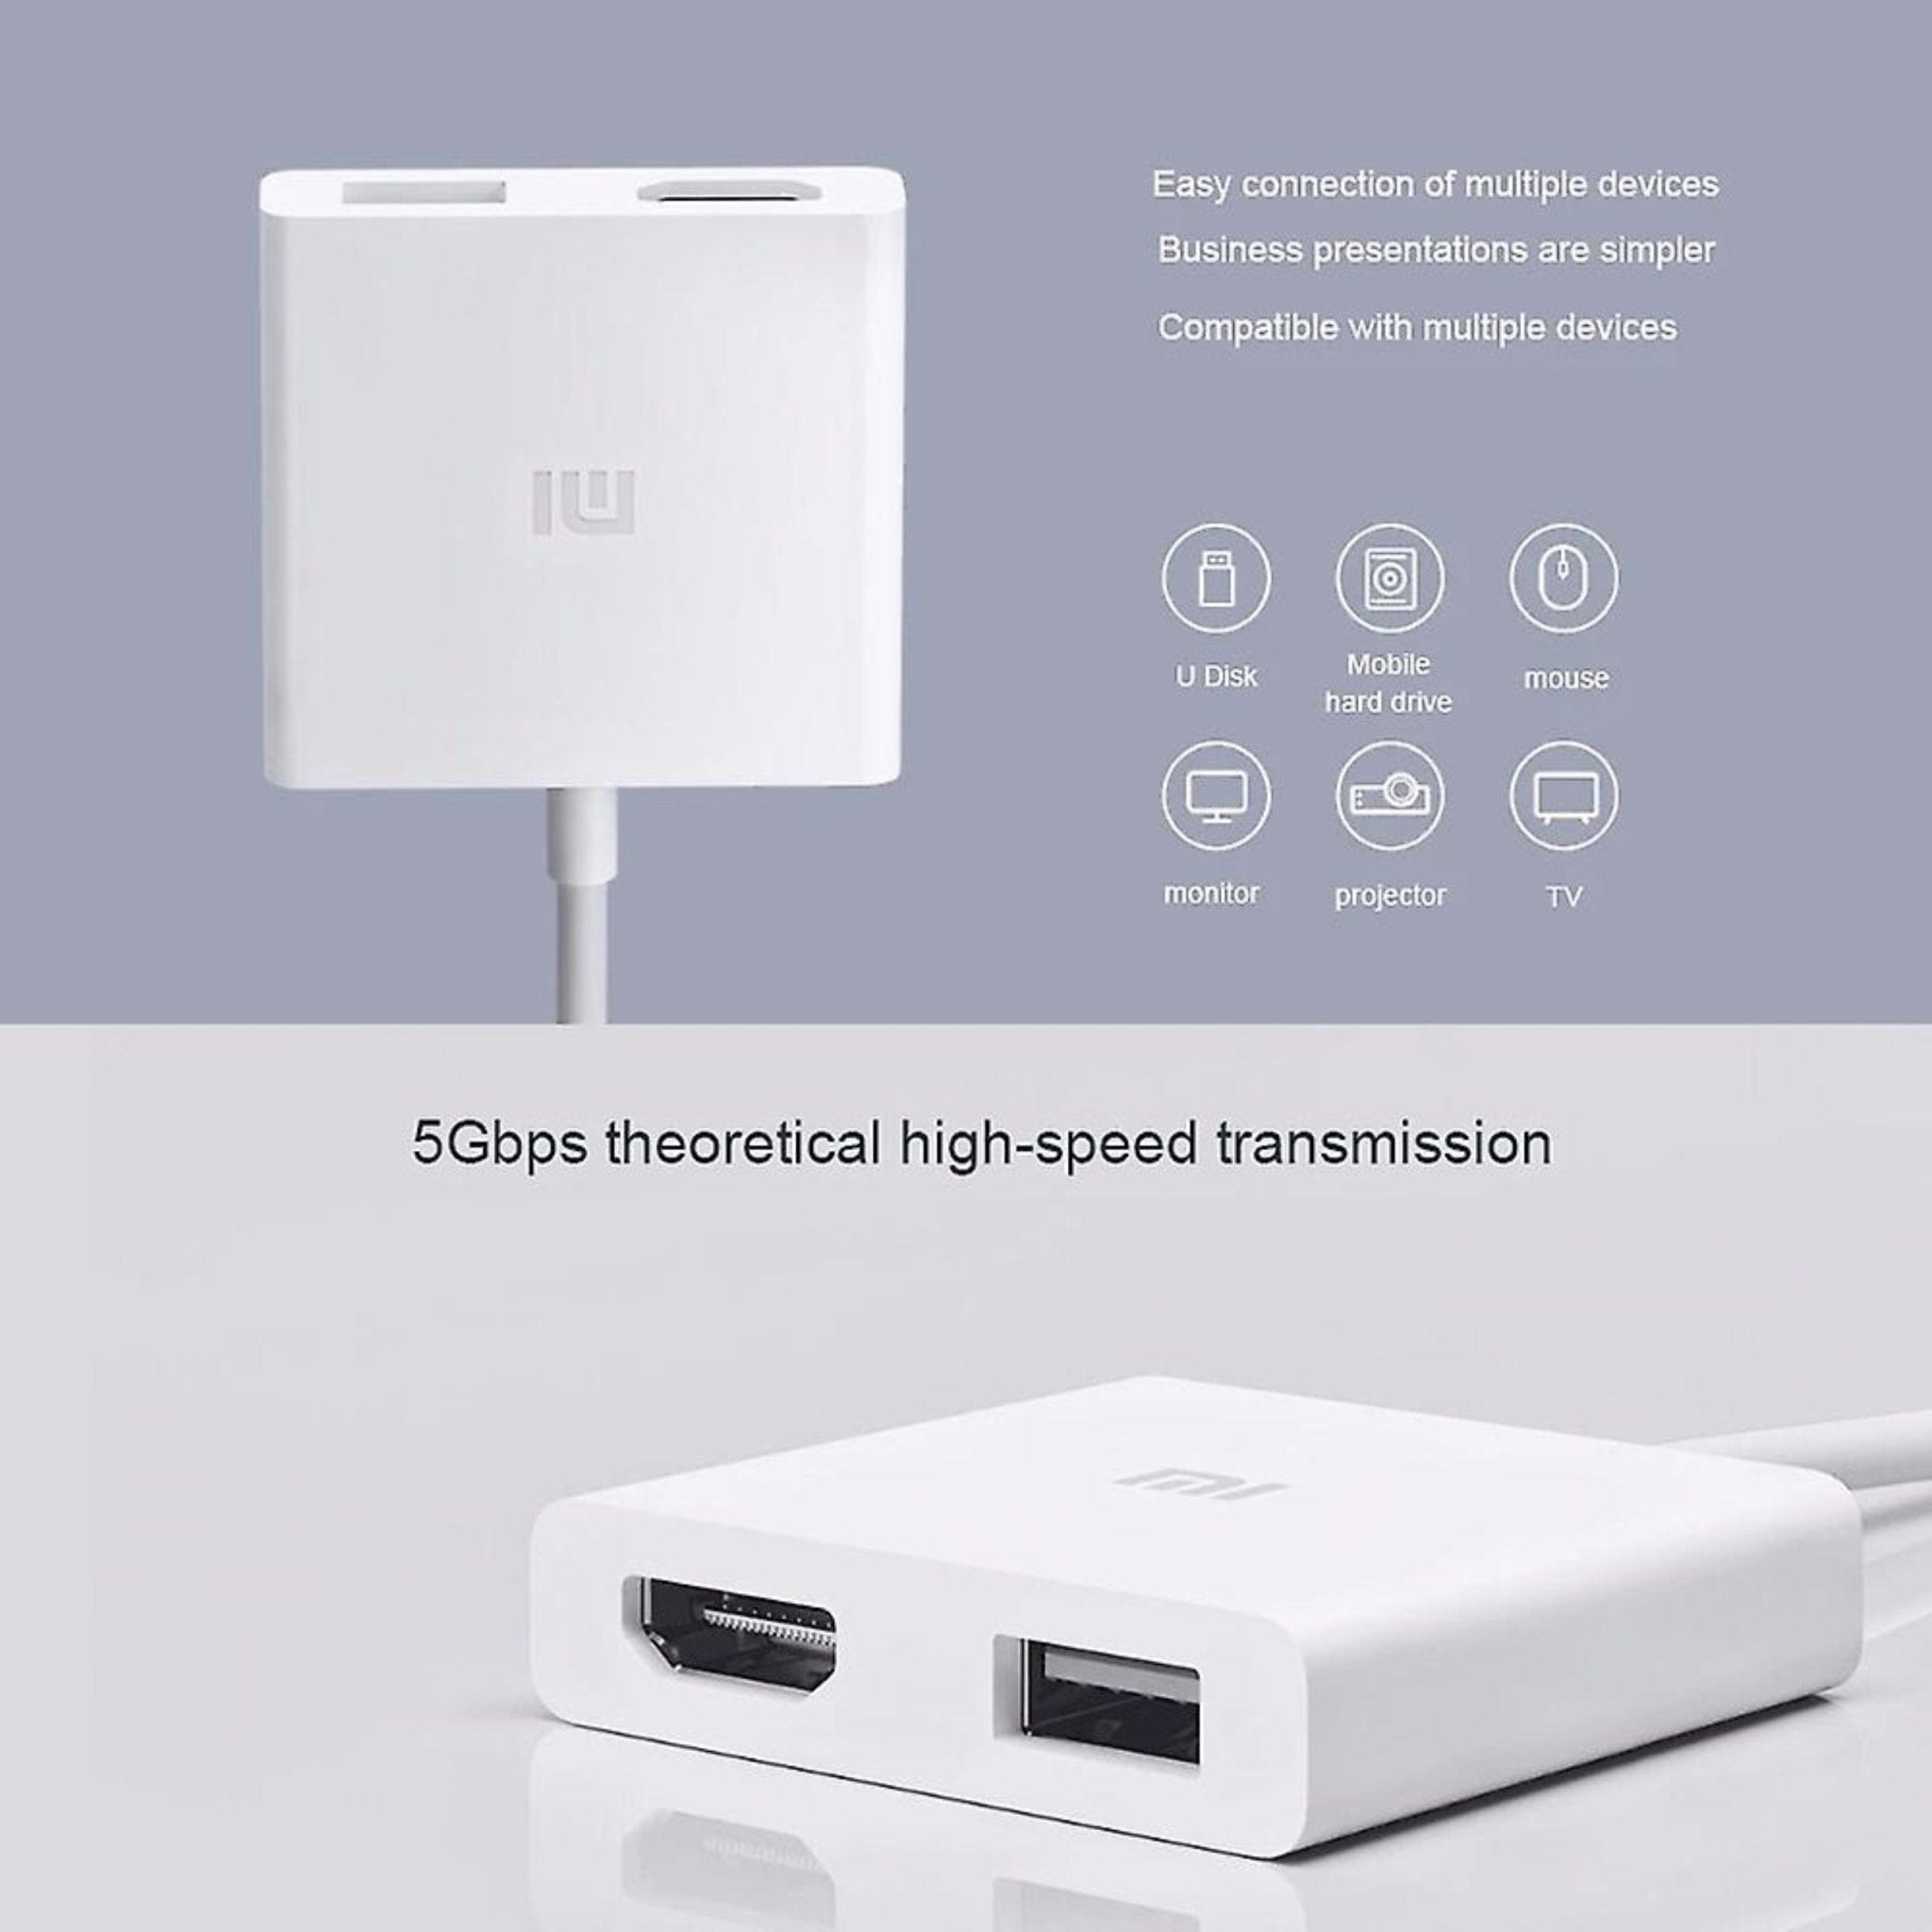 Xiaomi USB Type-C to HDMI Multiport Adapter ZJQ01TM - White